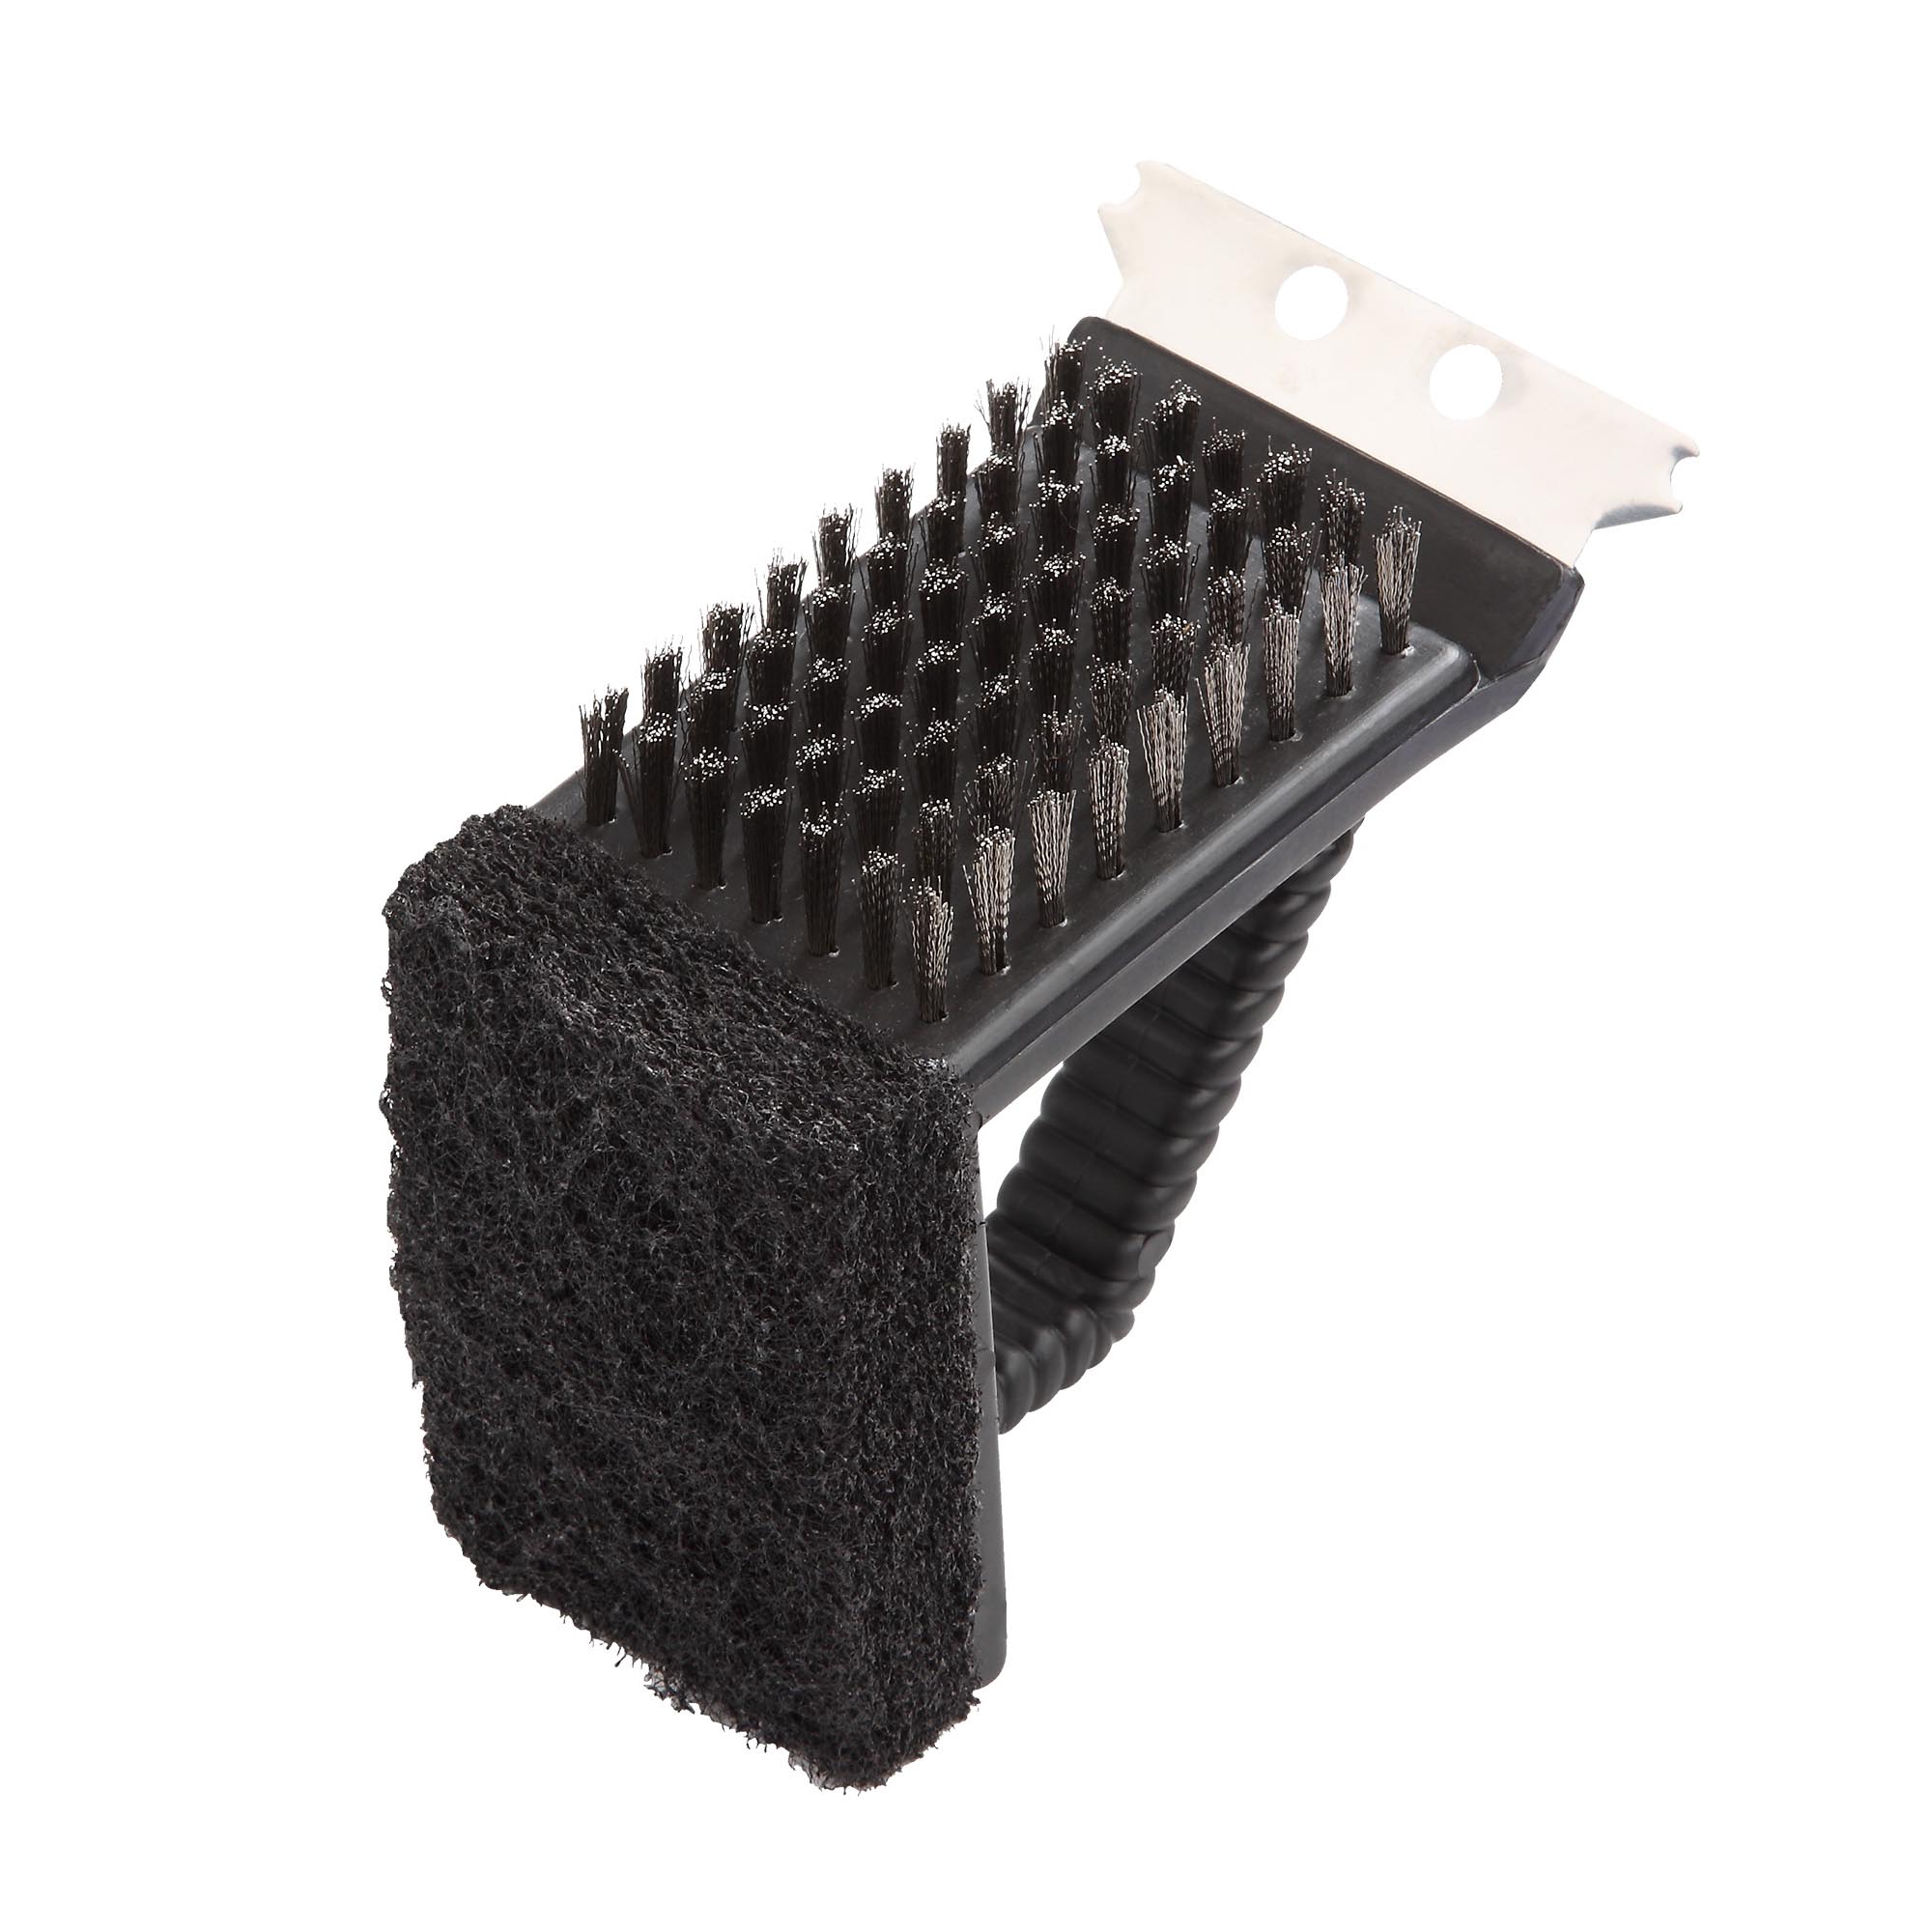 SP242C3L Grill Brush with Stainless Steel Scraper, 2-3/4 in L Brush, 1-3/4 in W Brush, Stainless Steel Bristle